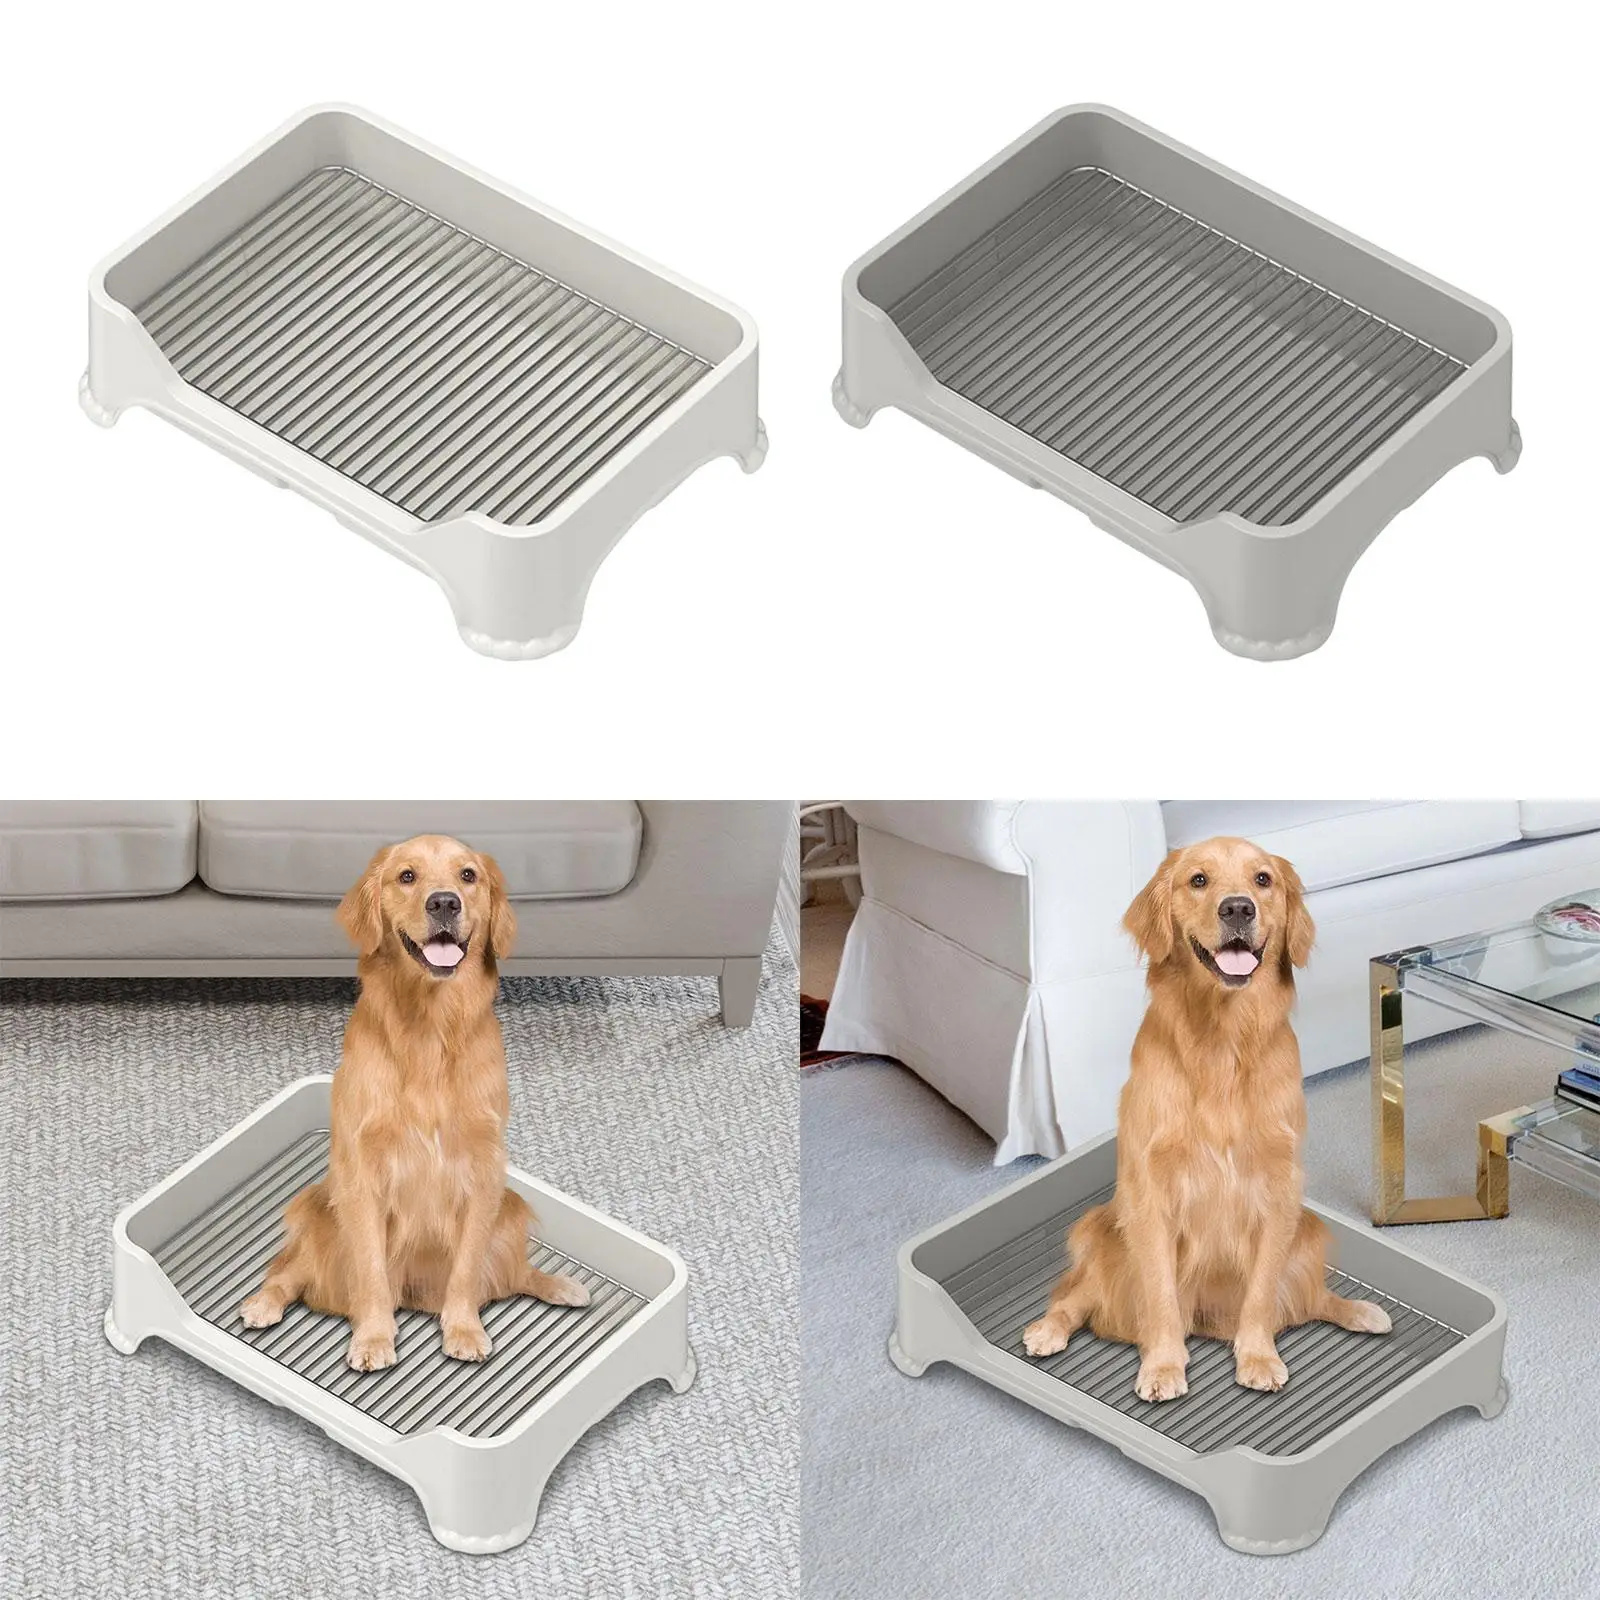 Dog Toilet Dog Potty Pad Holder Indoor Potty Tray Outdoor Trainer Corner Puppy Litter Box Training Potty Tray for Small Dogs